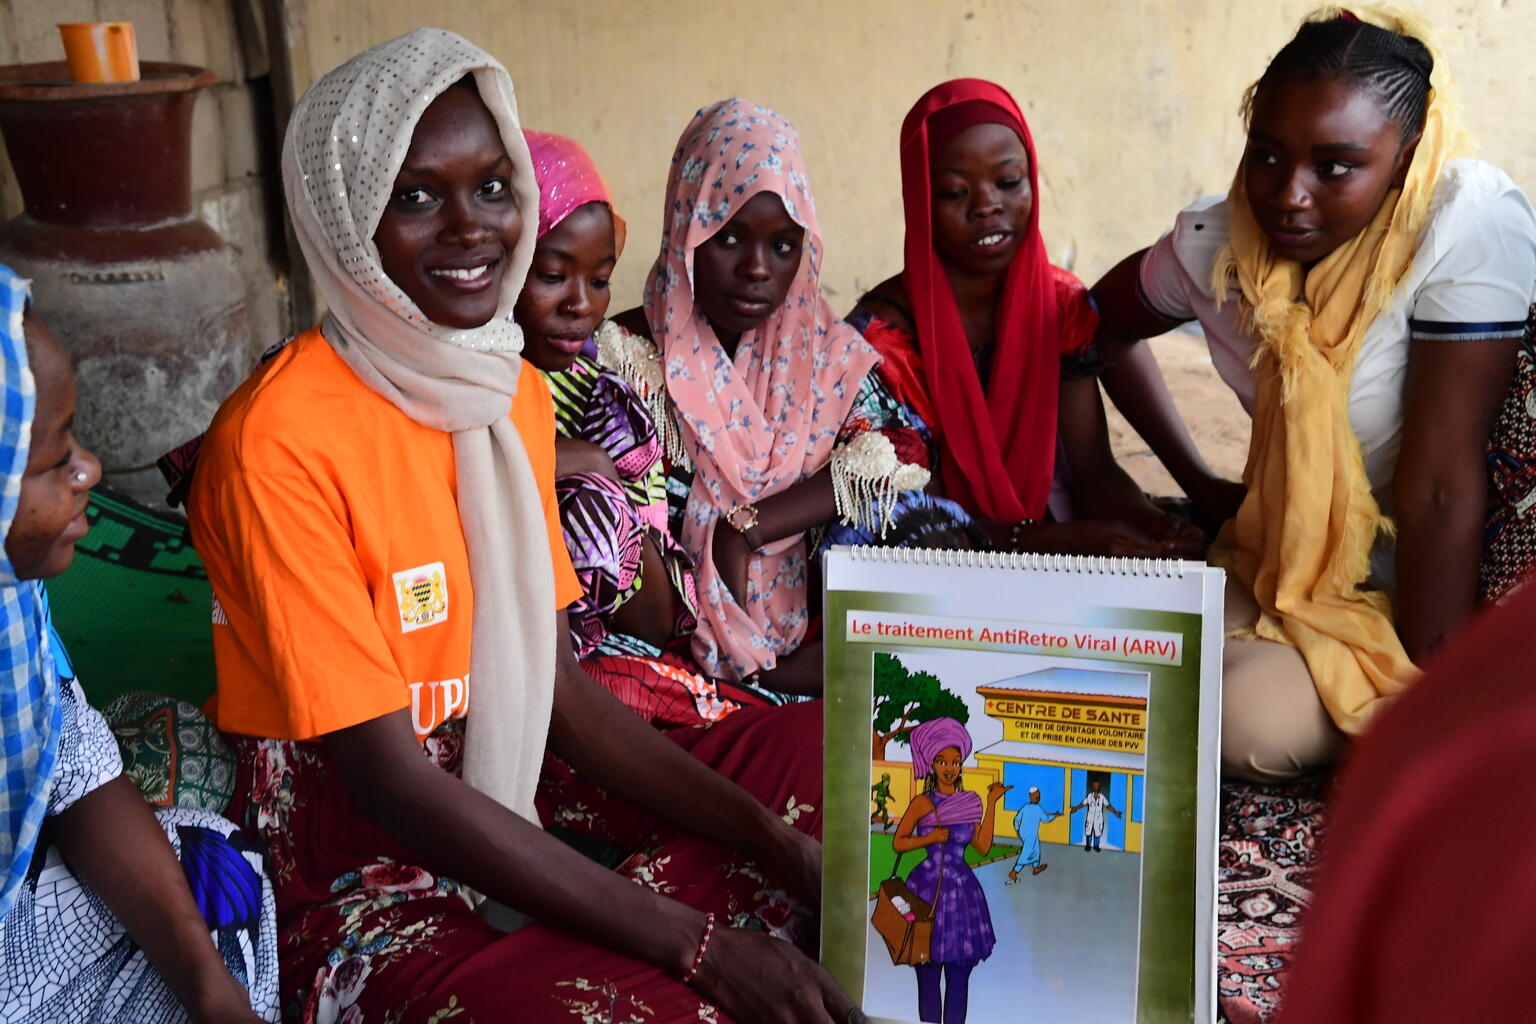 A peer educator at an educational session in Chad